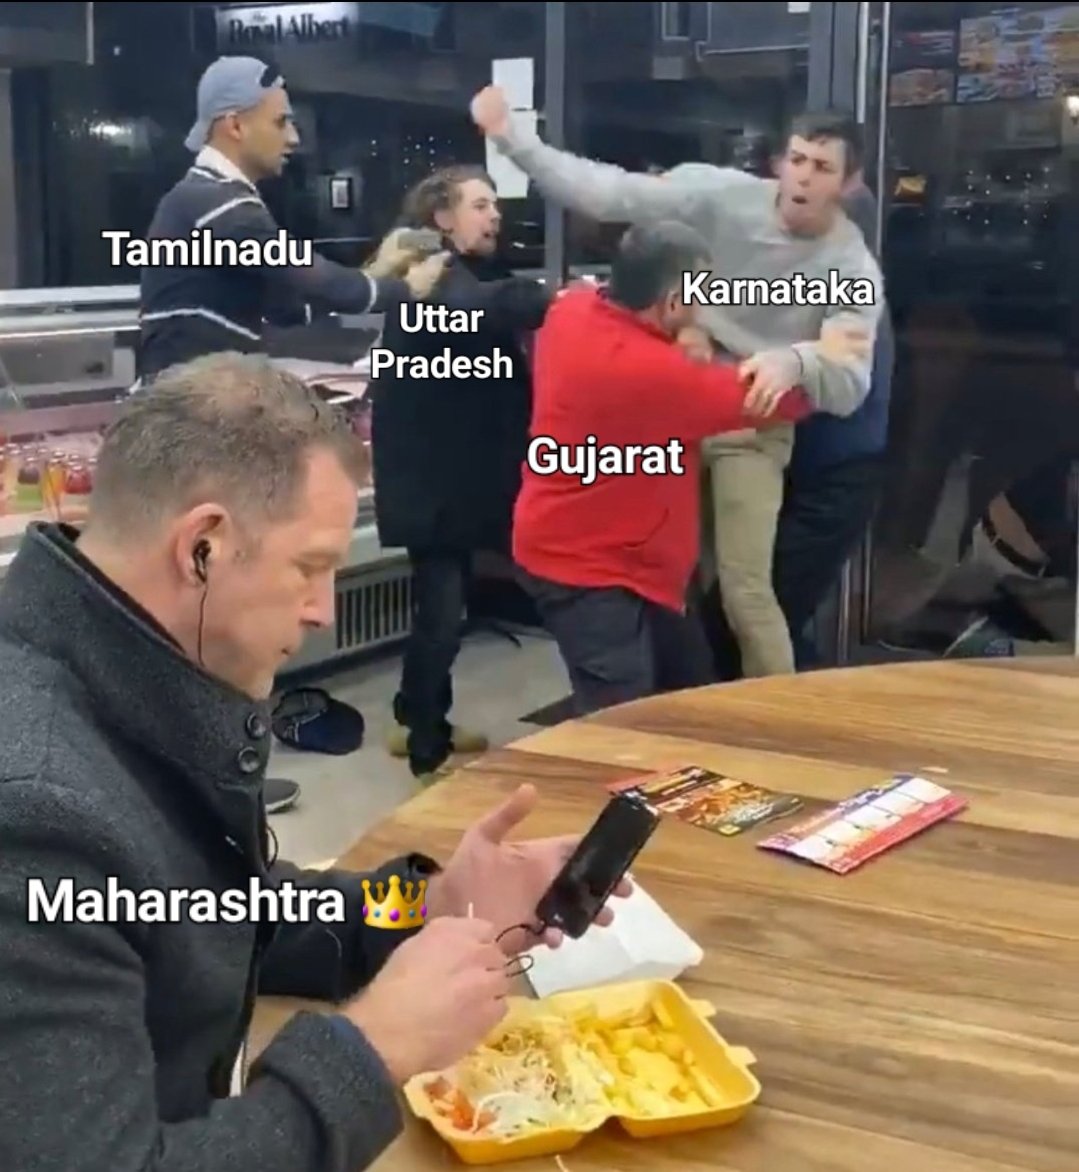 GST Collection April 2024

Maharashtra :   37,671 Cr
Karnataka :        15,978 Cr
Gujarat :              13,301 Cr
UttarPradesh : 12,290 Cr
Tamilnadu :        12,210 Cr

While the other States are fighting for the 2nd place, Maharashtra is chilling at the top with a Huge margin.